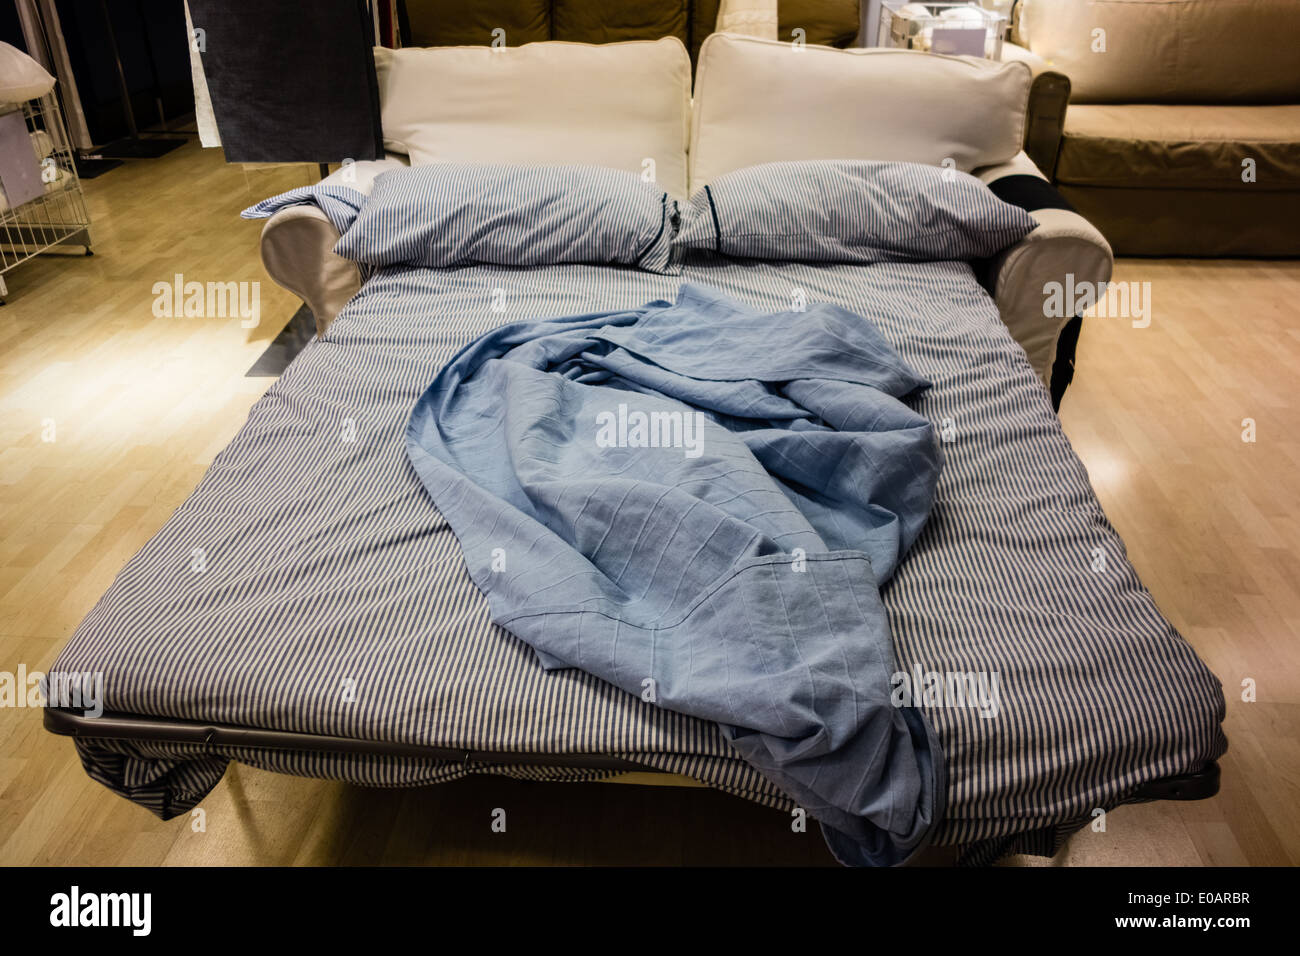 an opened sofa bed with bed clothes and pillows Stock Photo